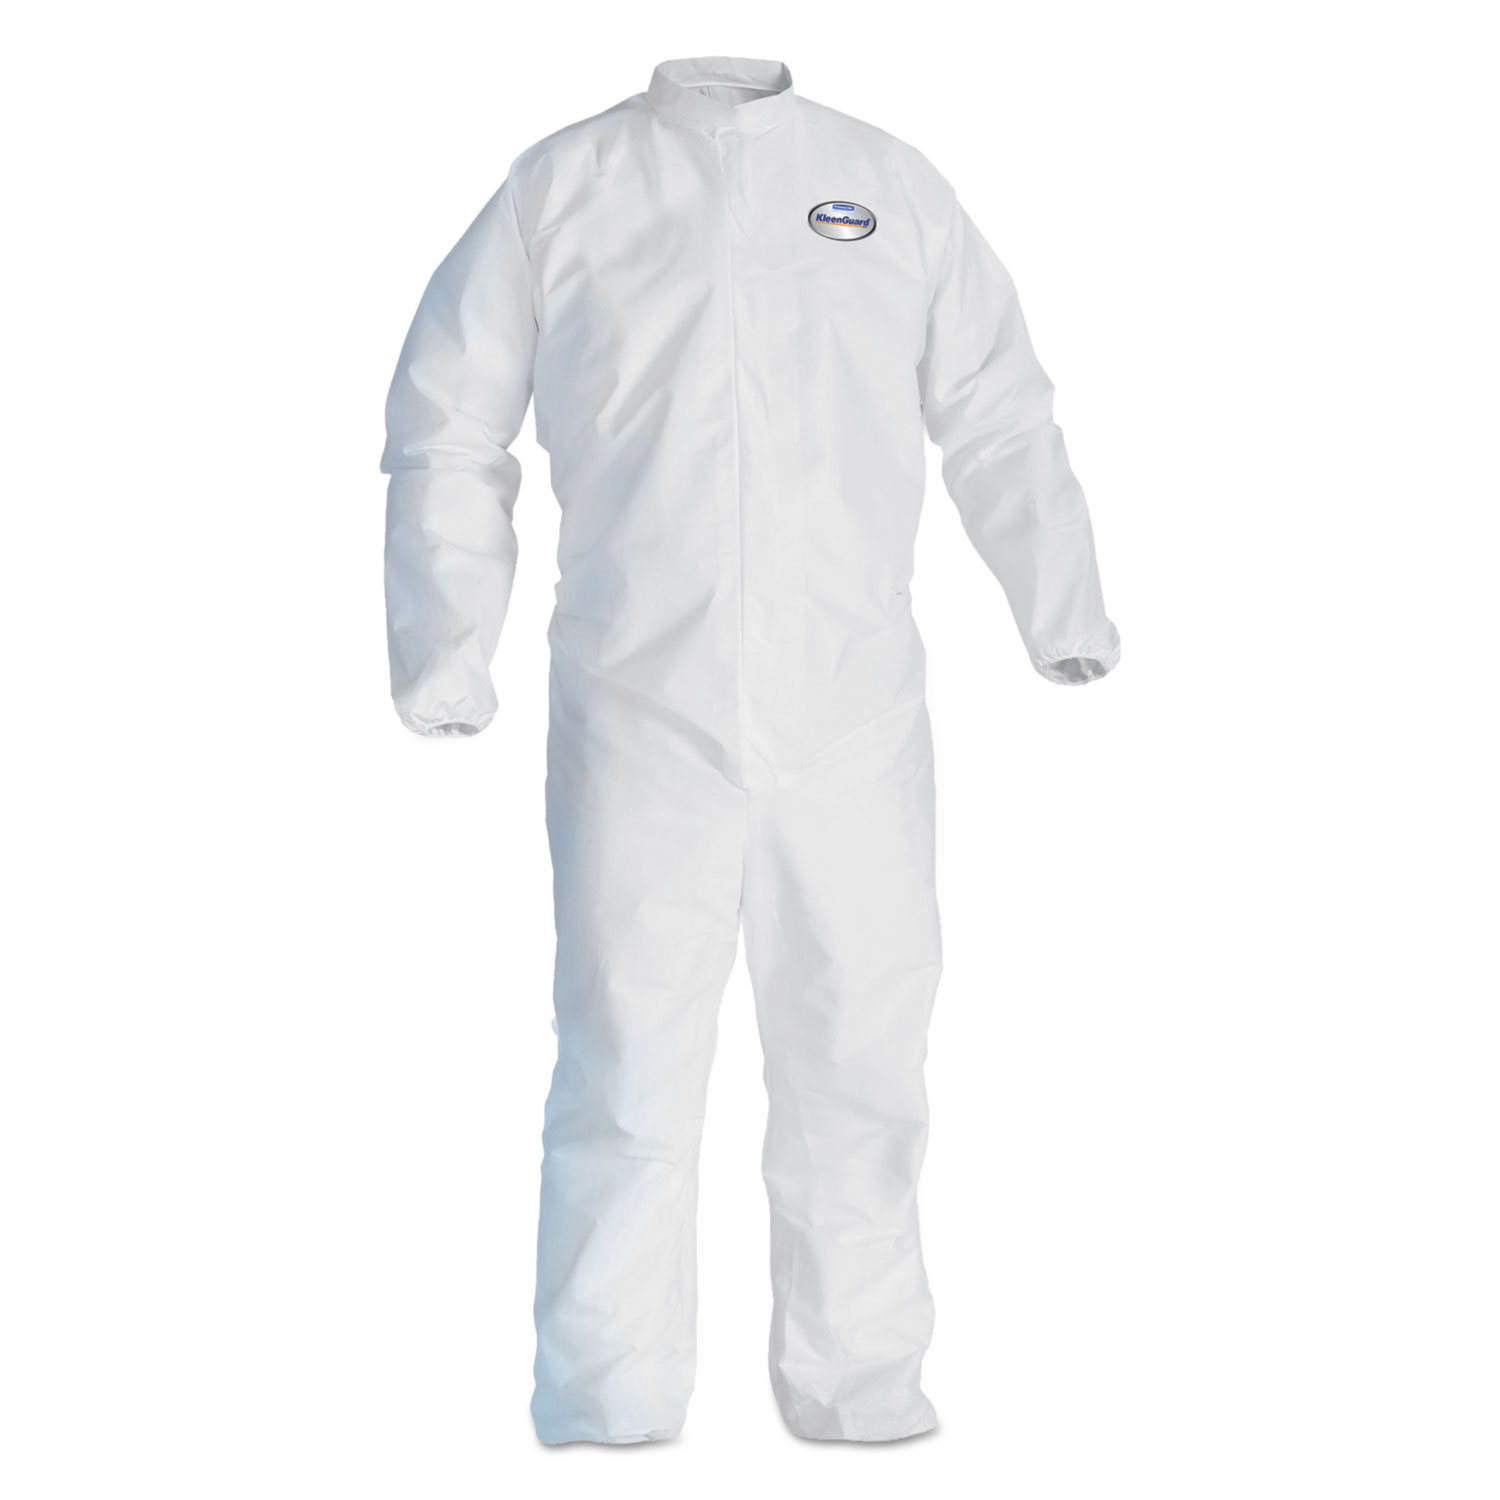 A30 Elastic-Back & Cuff Coveralls, White, X-Large, 25/Case